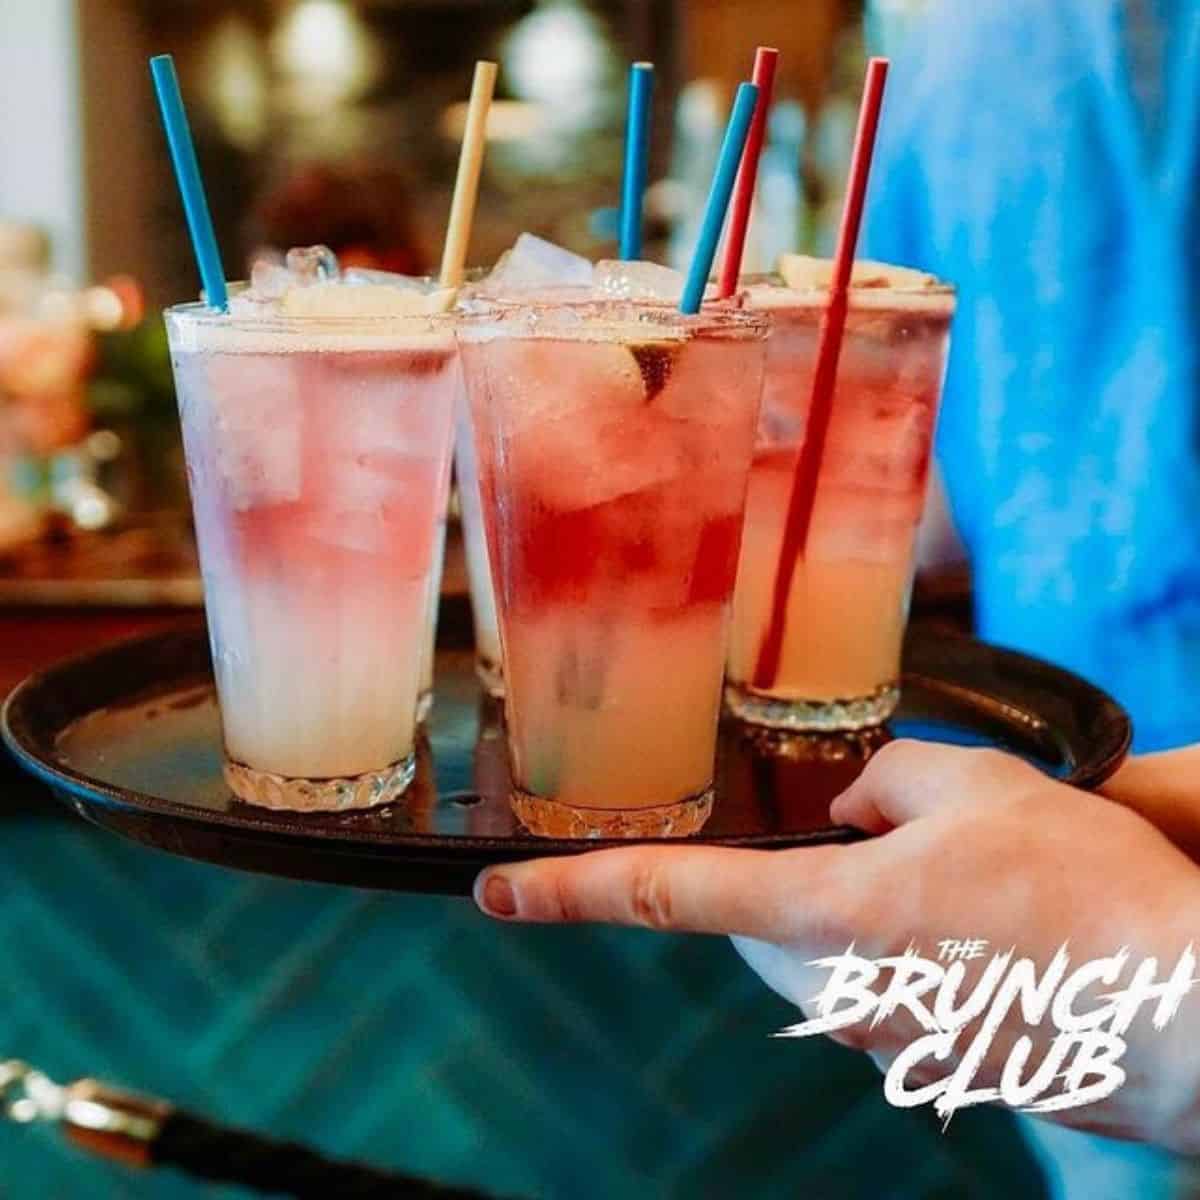 served beautiful cocktail glasses on tray The Brunch Club